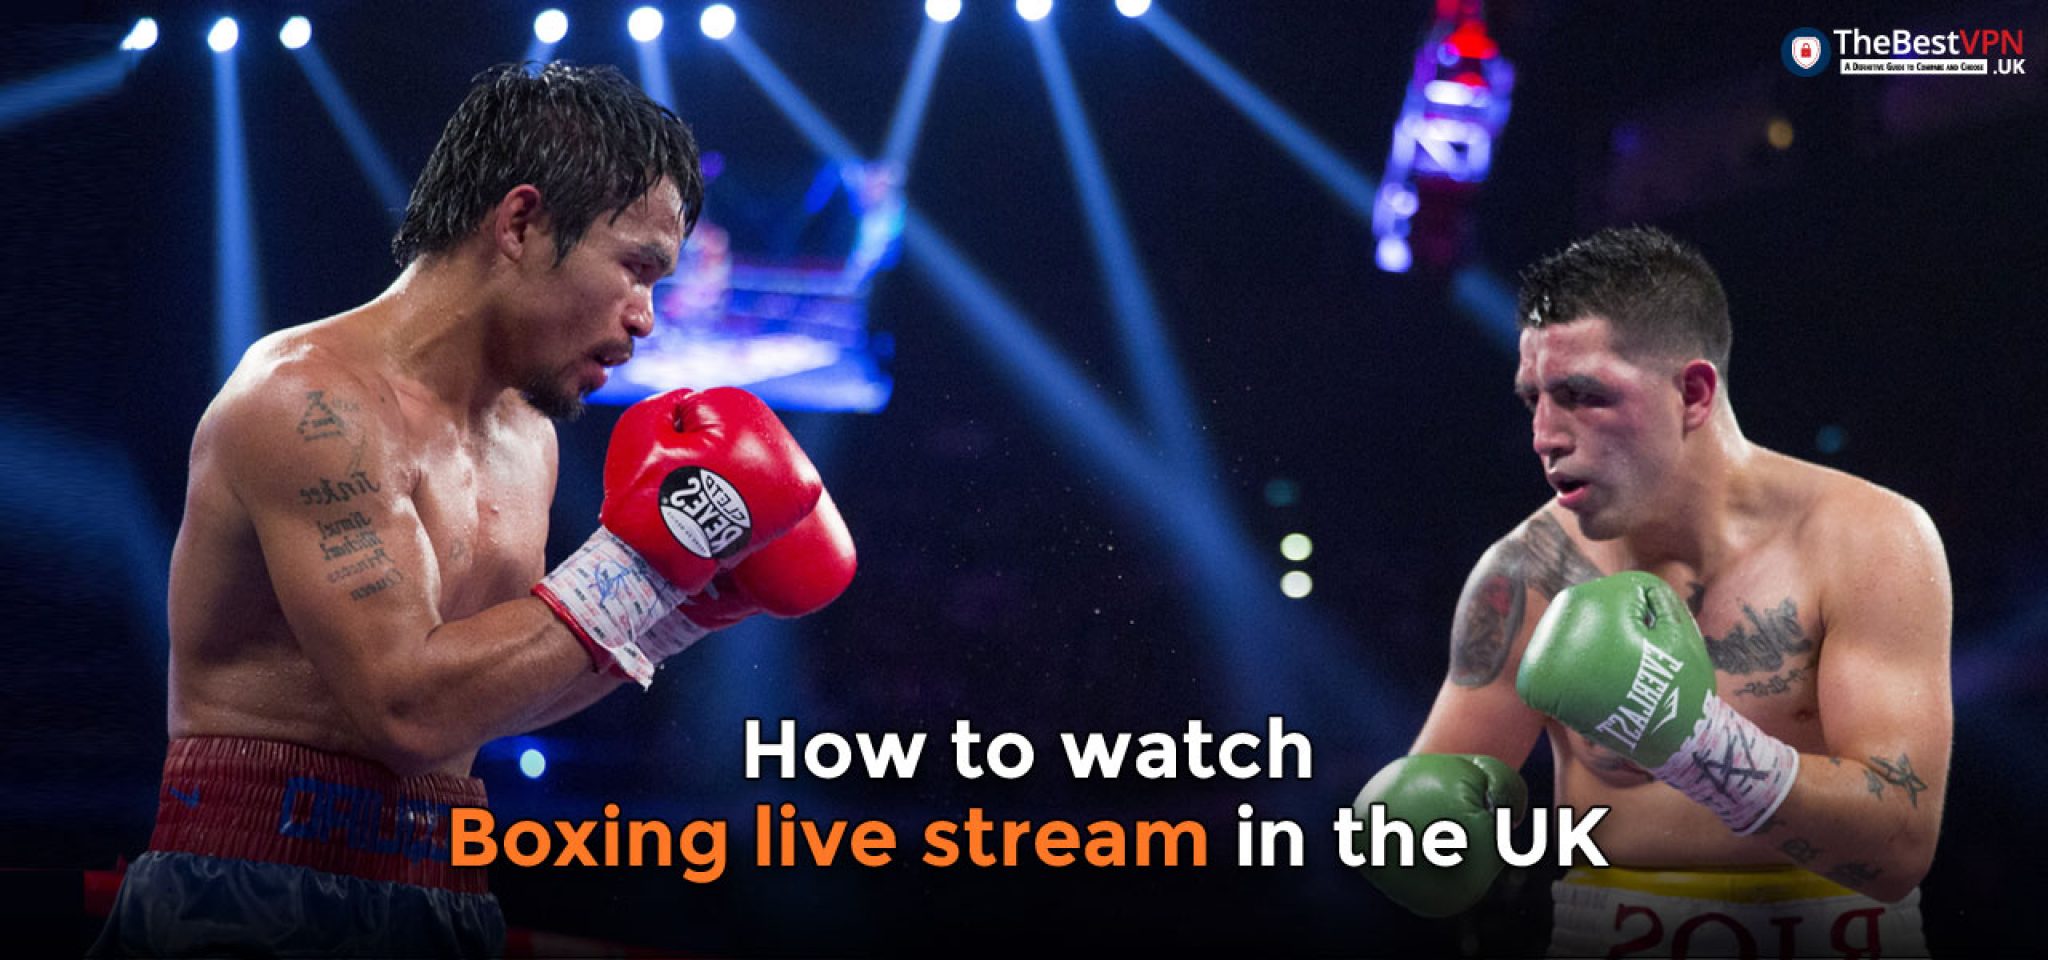 How to Watch boxing live stream UK in 2021 TheBestVPN.UK